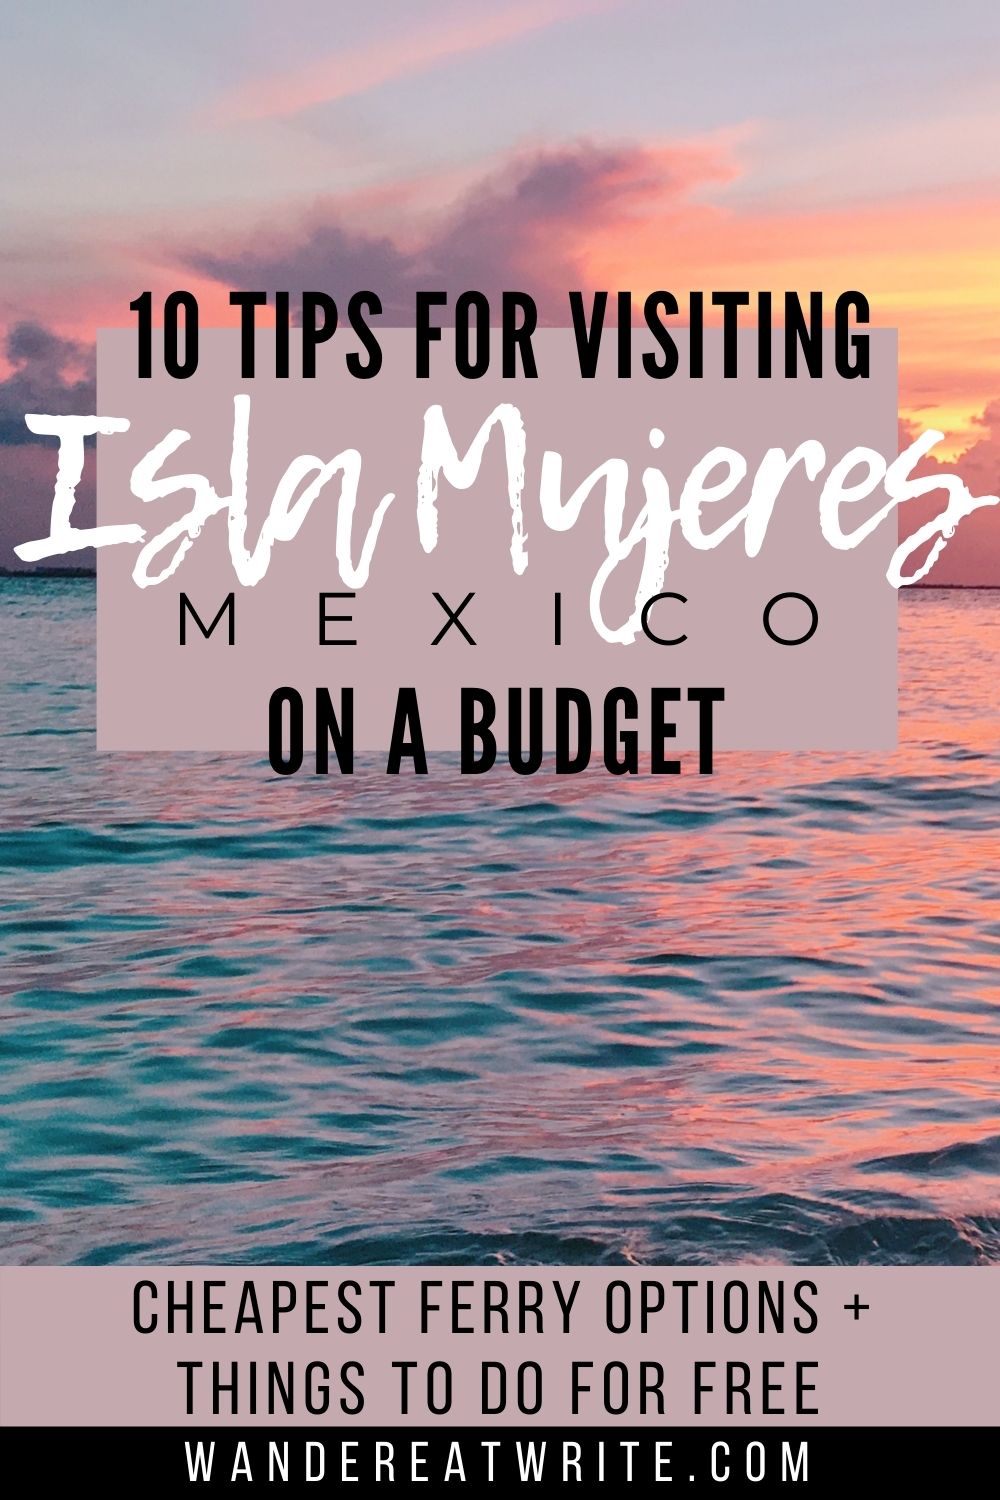 10 Tips for Visiting Isla Mujeres on a Budget